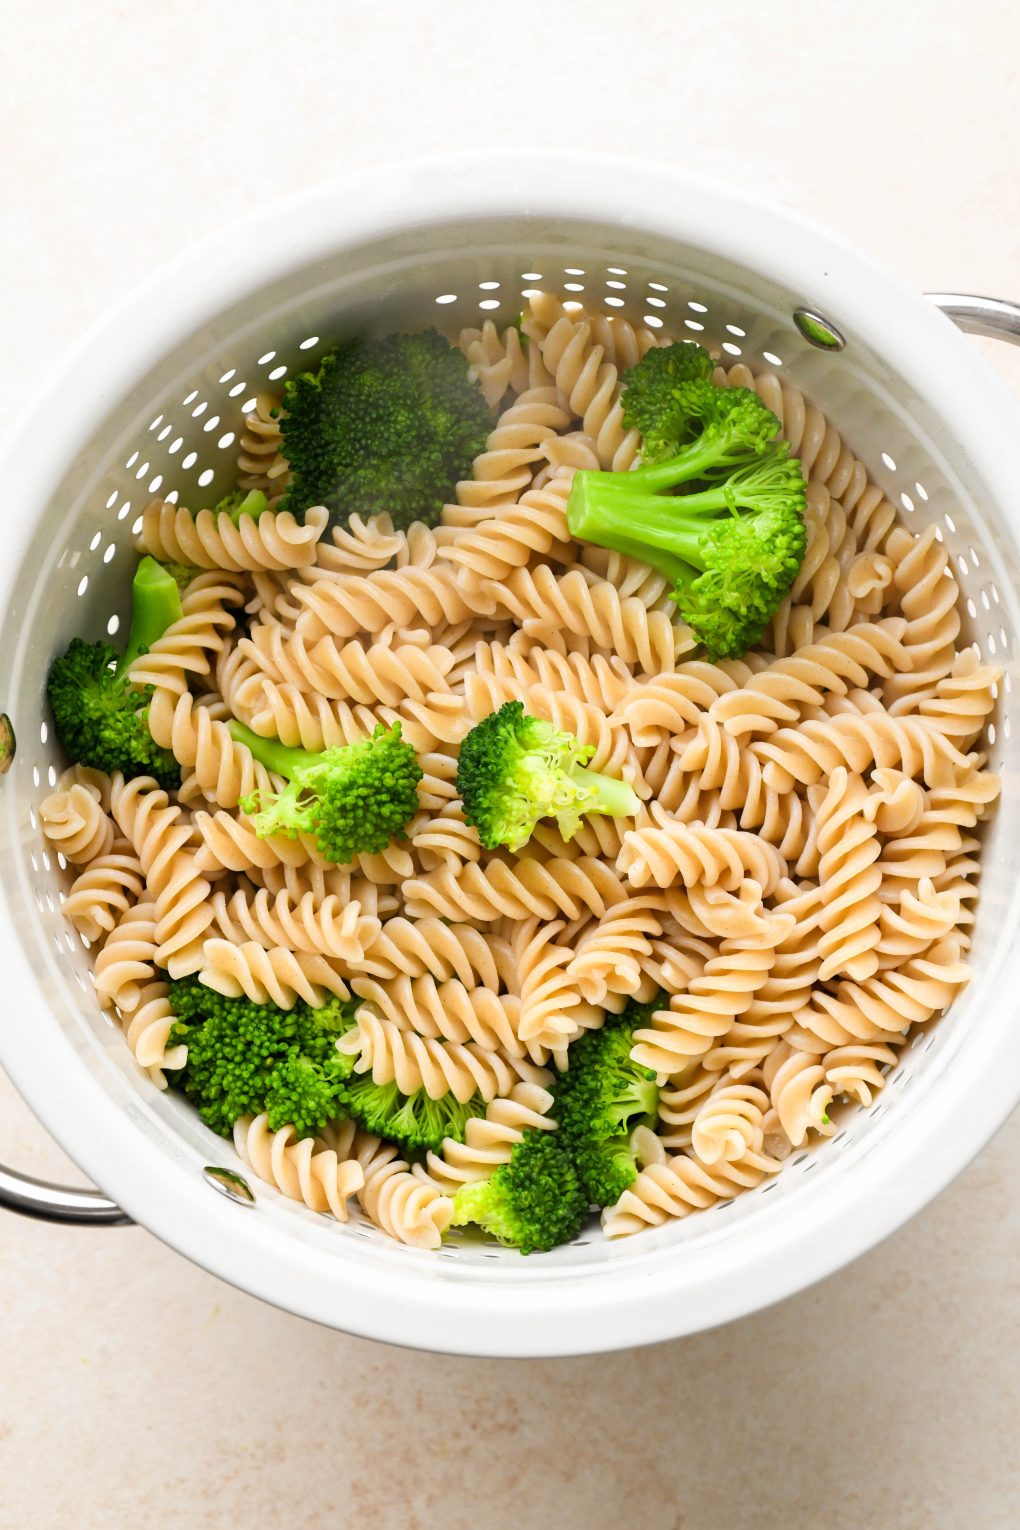 How to make healthy chicken sausage pasta: Cooked pasta and broccoli drained in a white colander.